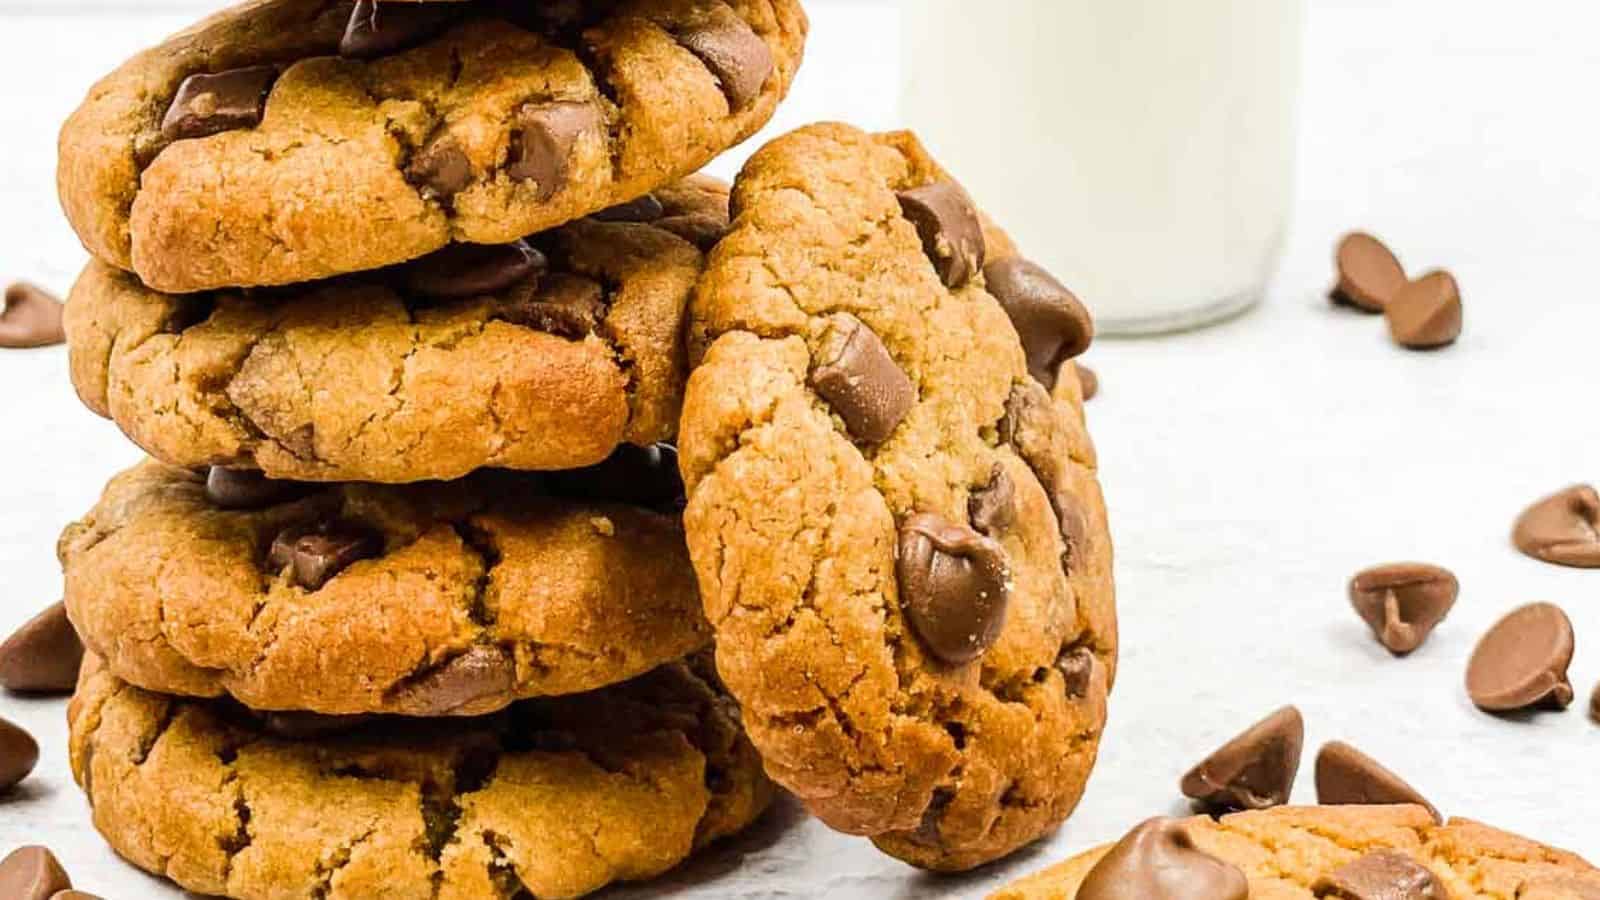 A stack of chocolate chip cookies with a glass of milk.